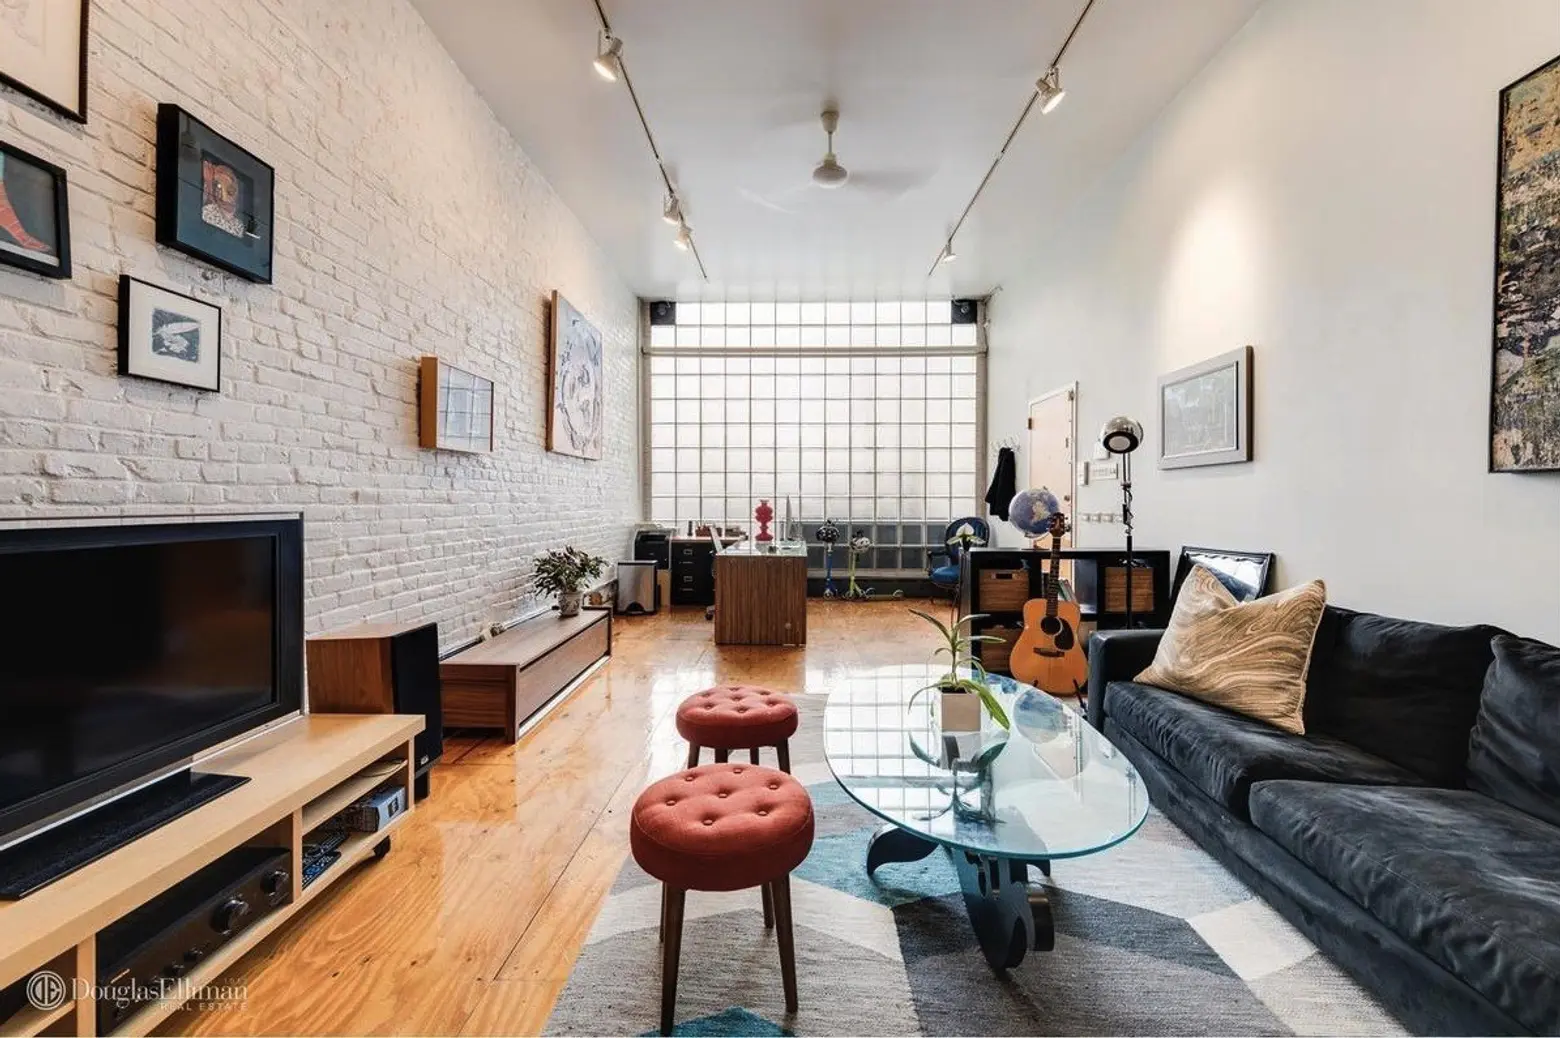 $4.5M multi-family townhouse in Williamsburg boasts glass walls and a floating staircase